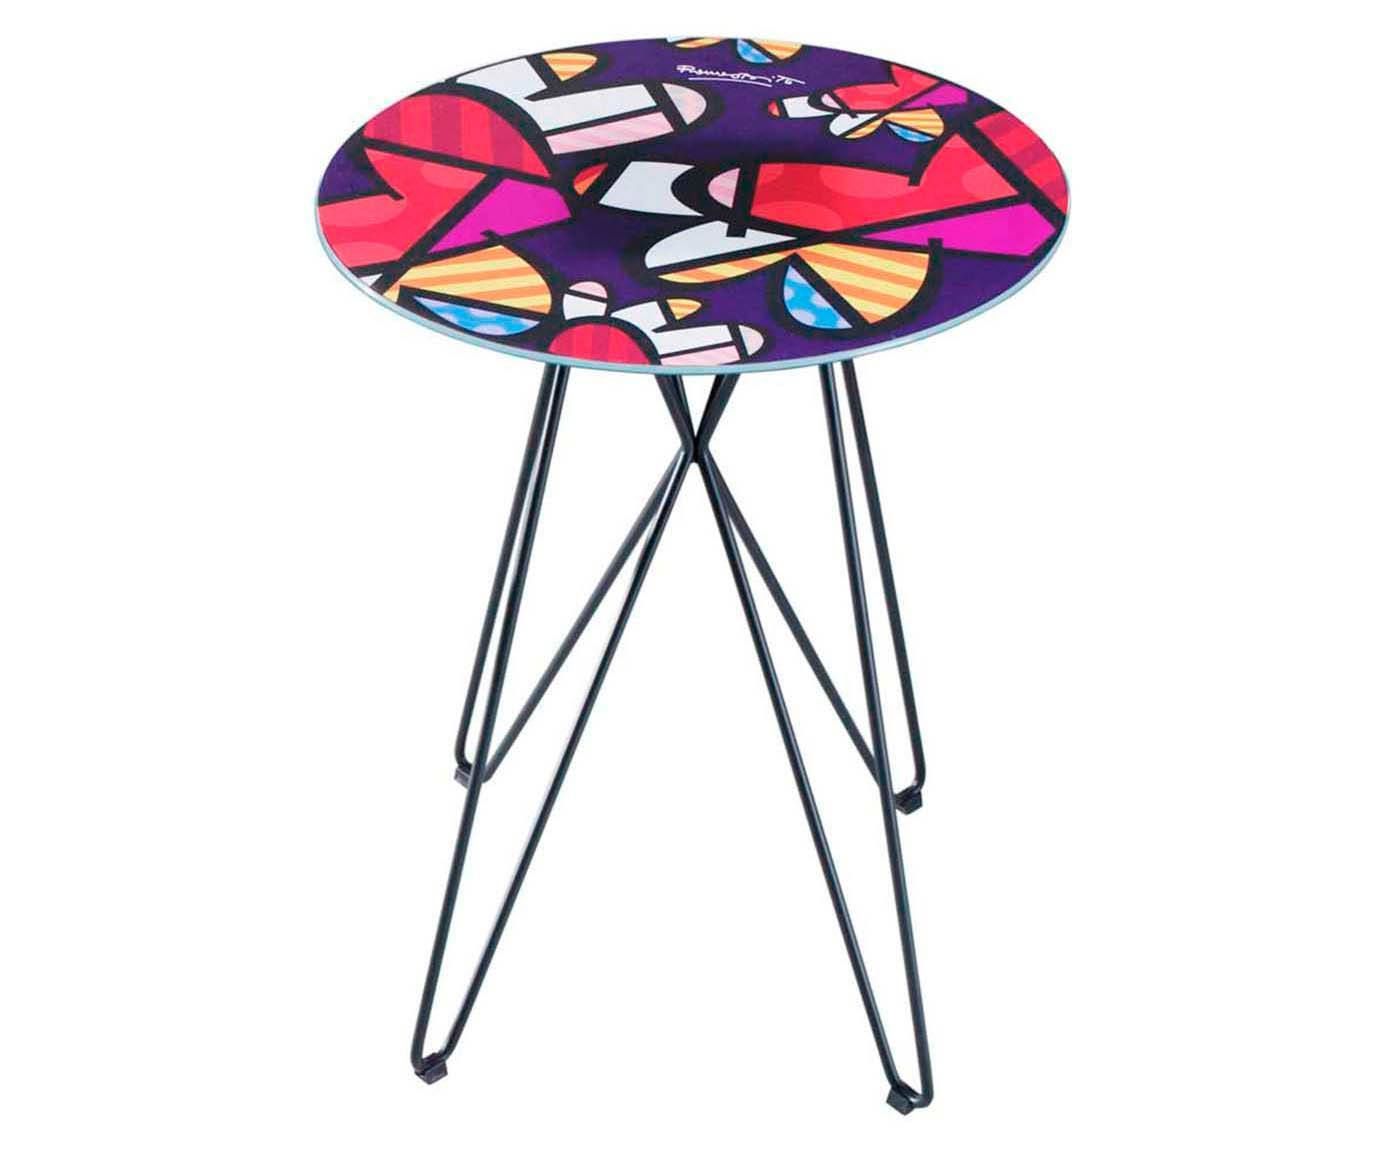 Mesa lateral butterfly love maxi square - romero britto | Westwing.com.br